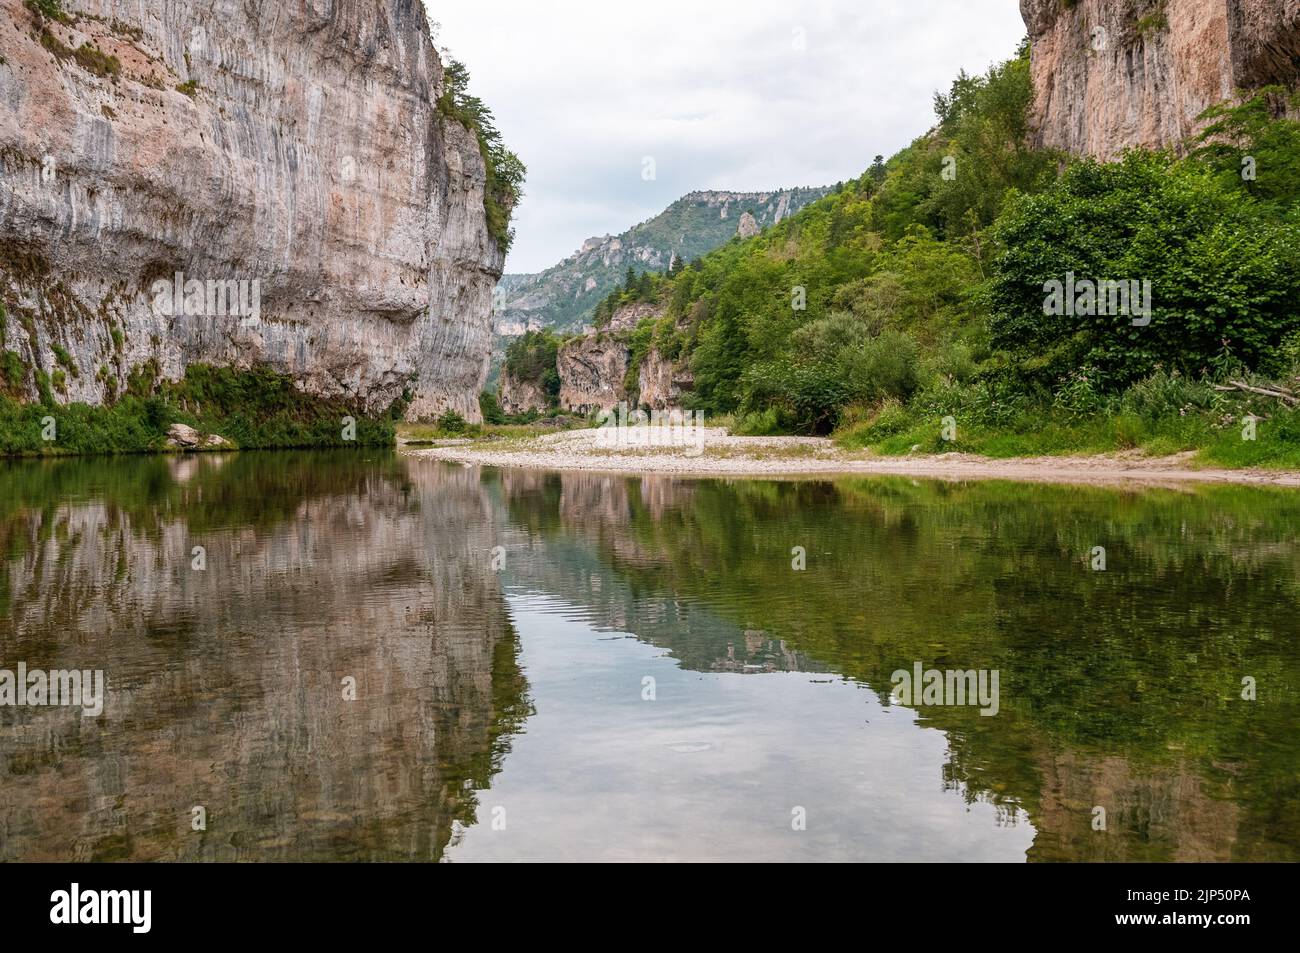 Reflection and tranquility, Gorges du Tarn, Lozere, France Stock Photo